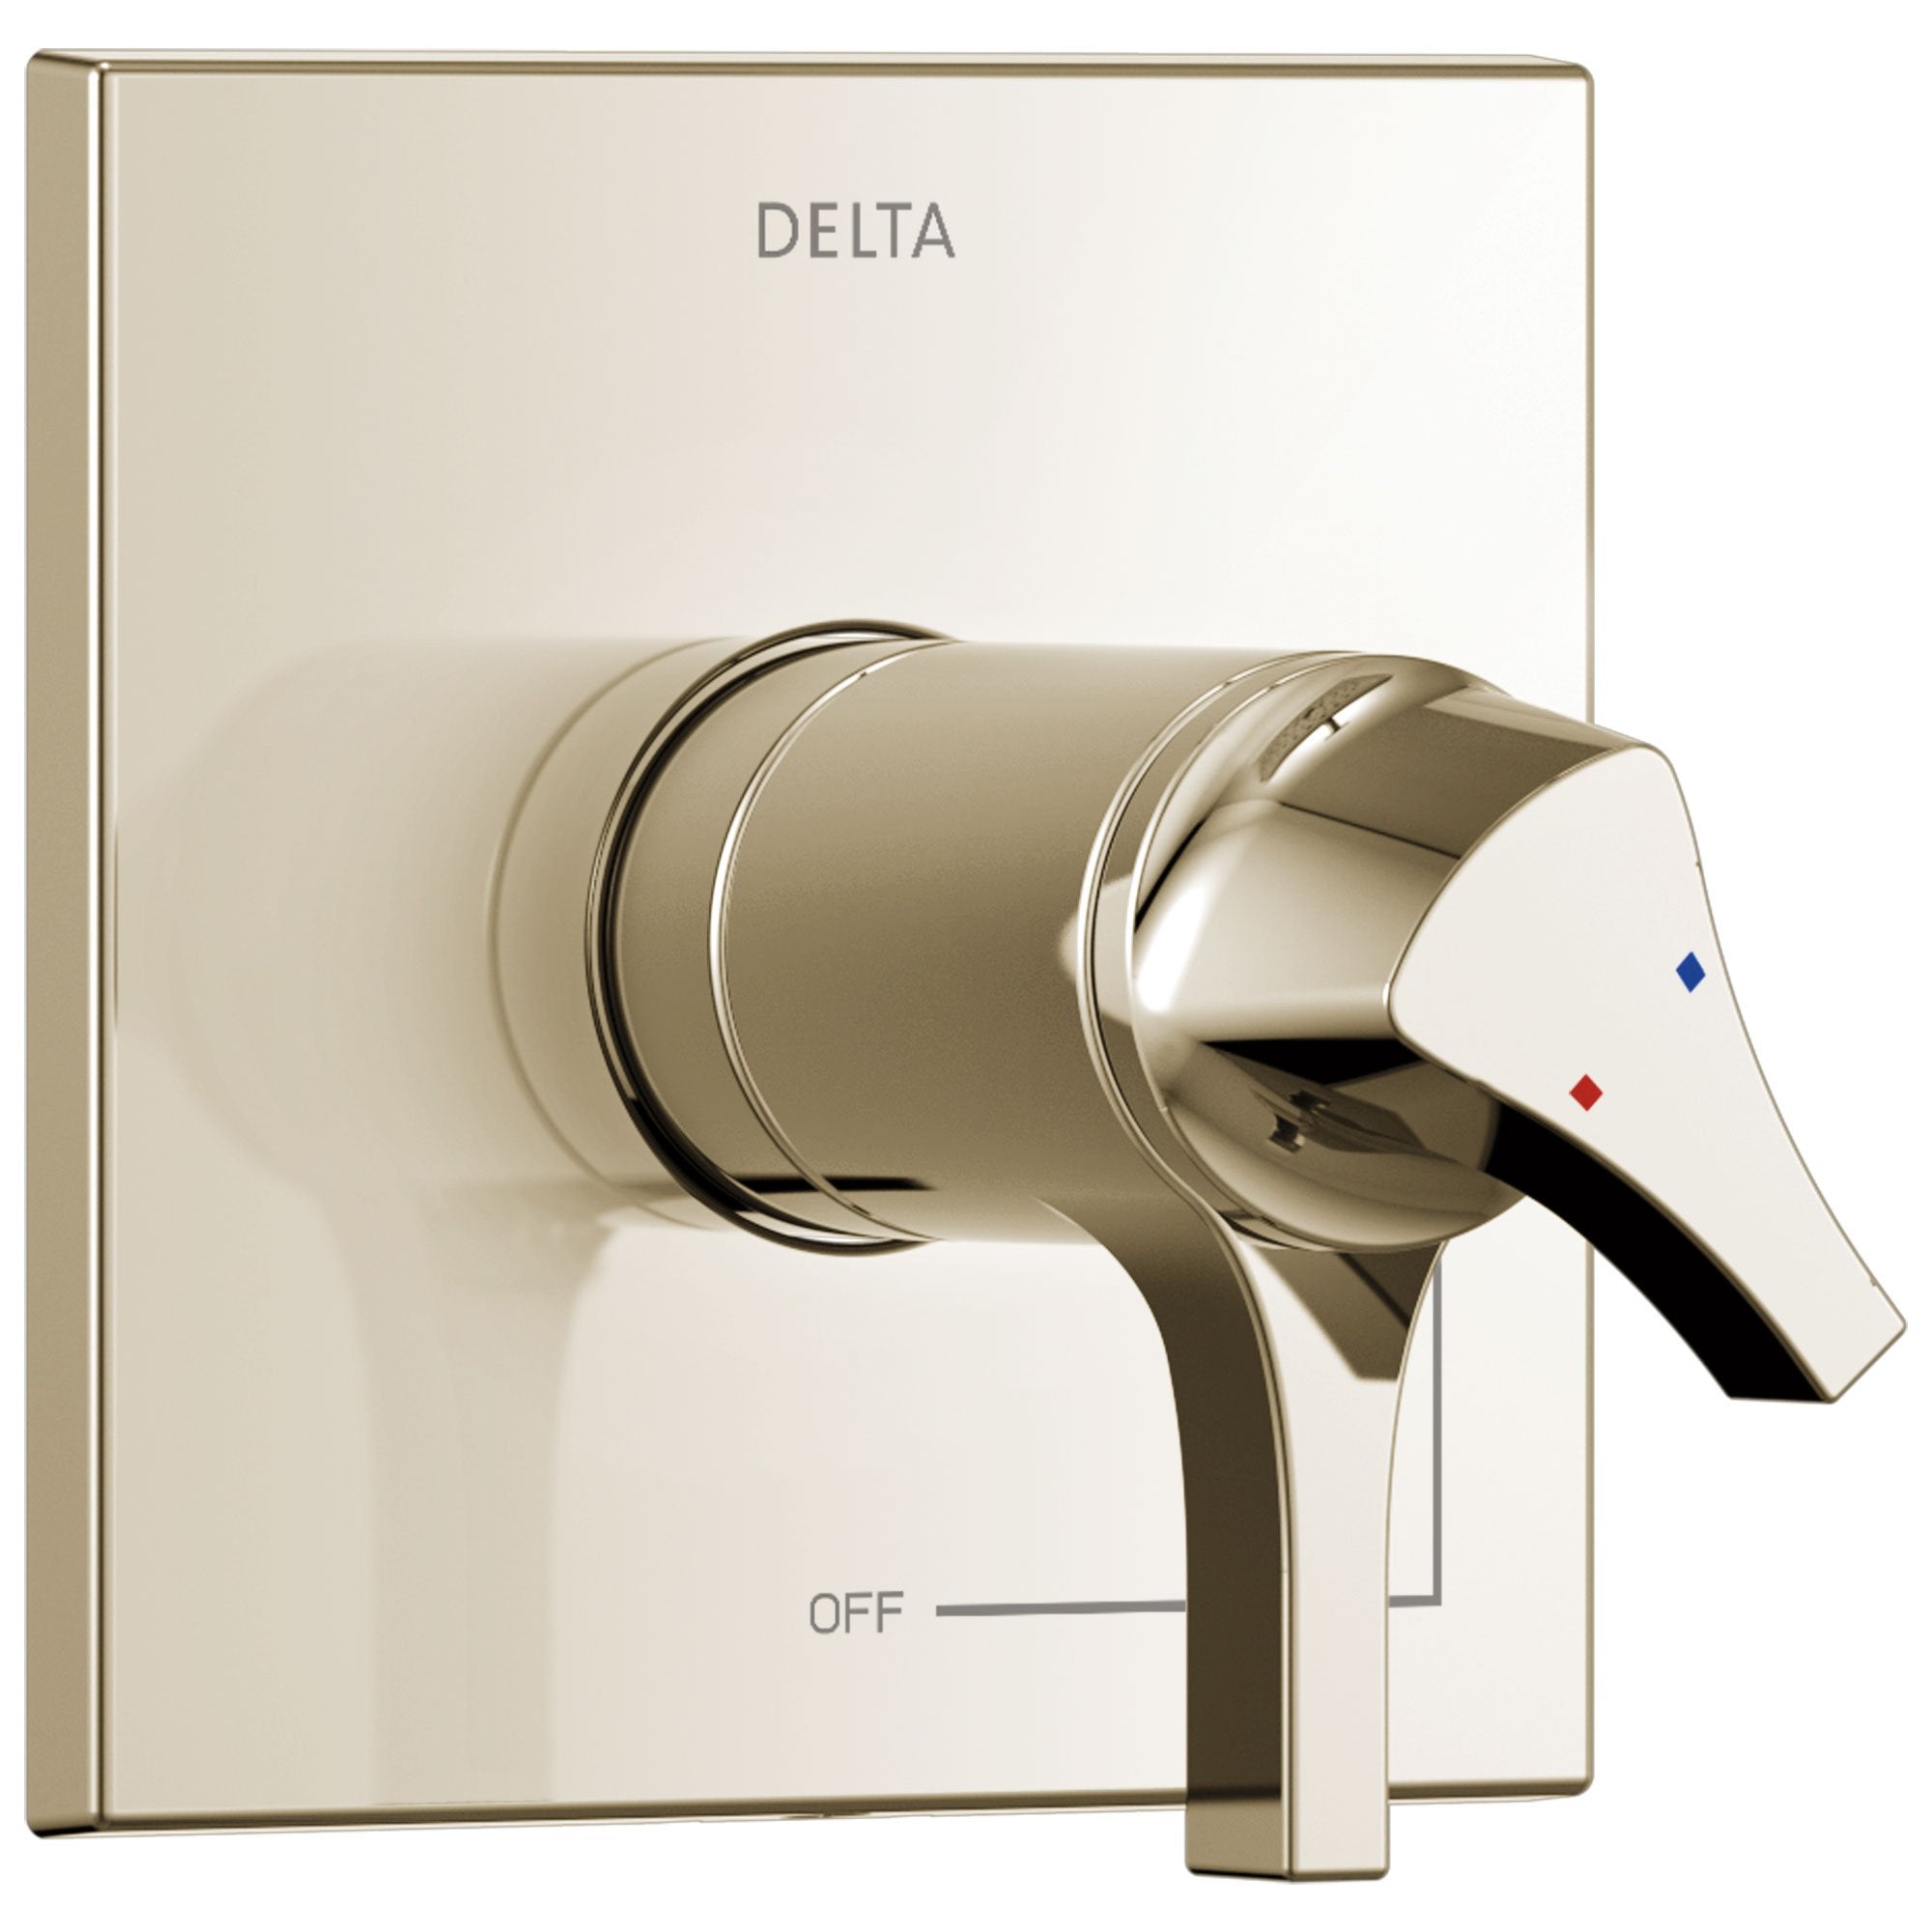 Delta Zura Collection Polished Nickel TempAssure 17T Dual Temperature and Pressure Shower Faucet Control Handle Includes Rough-in Valve with Stops D1945V